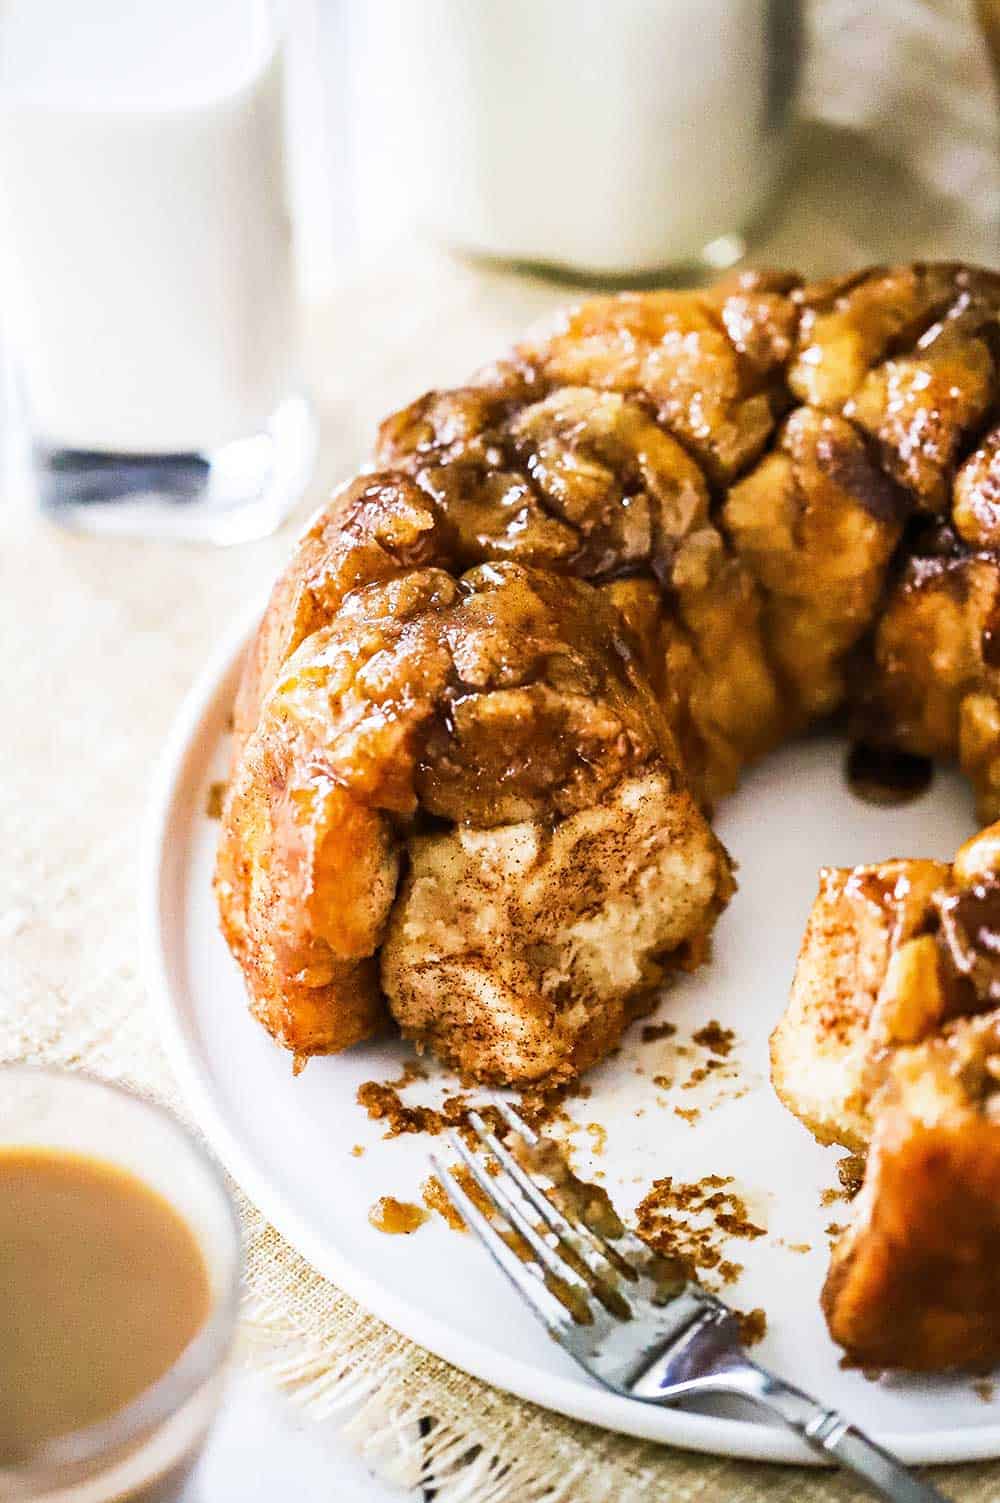 Homemade monkey bread with a few pieces missing on a white round platter next to a glass cup of coffee. wi